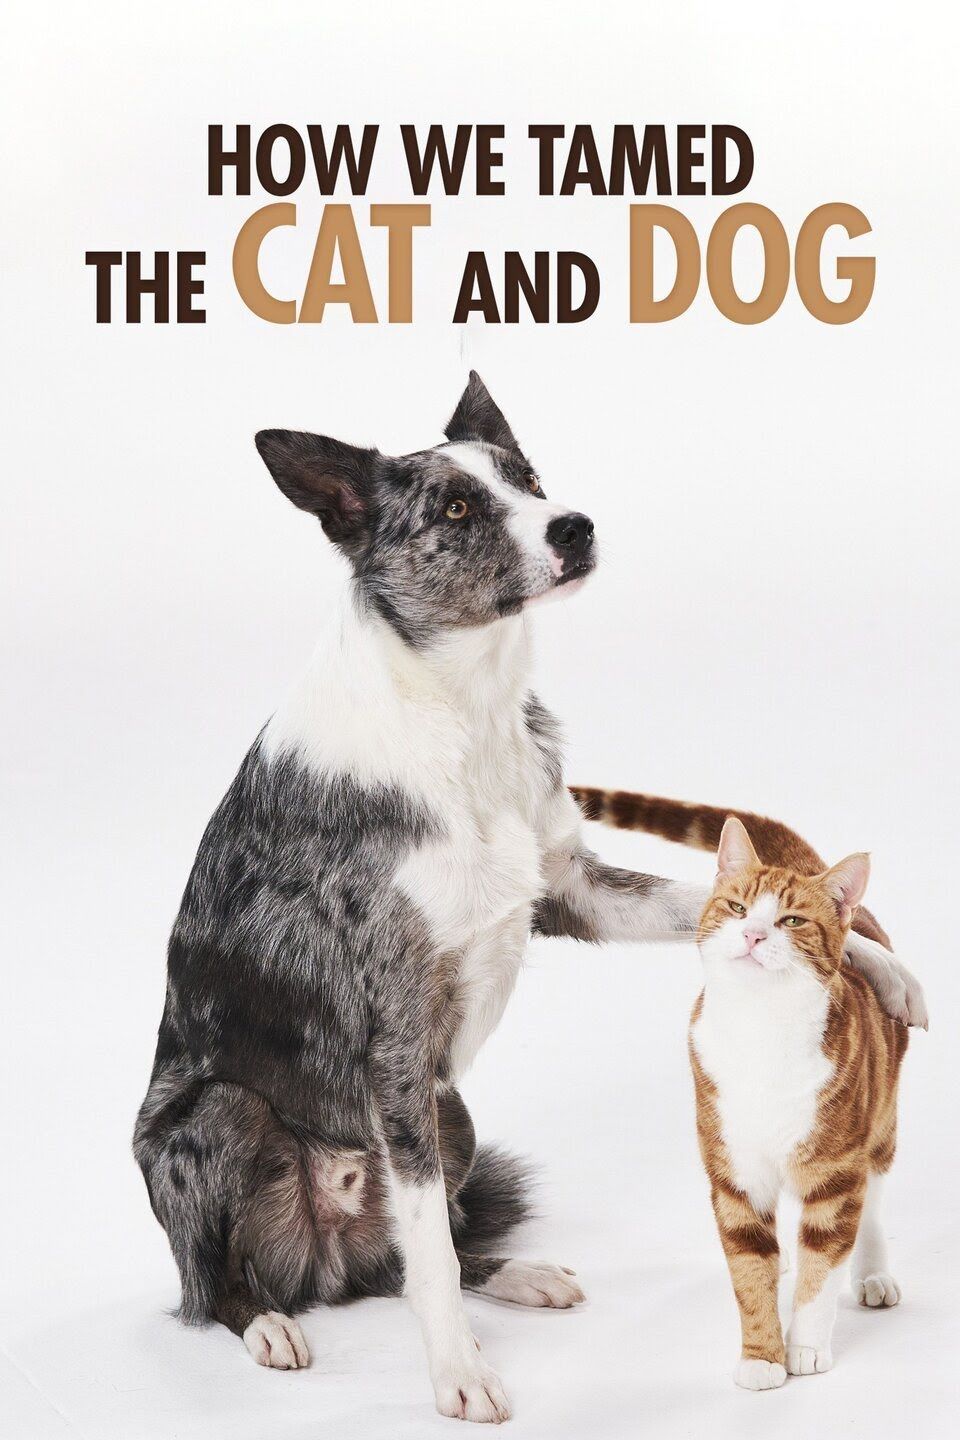 How We Tamed the Cat and Dog ne zaman